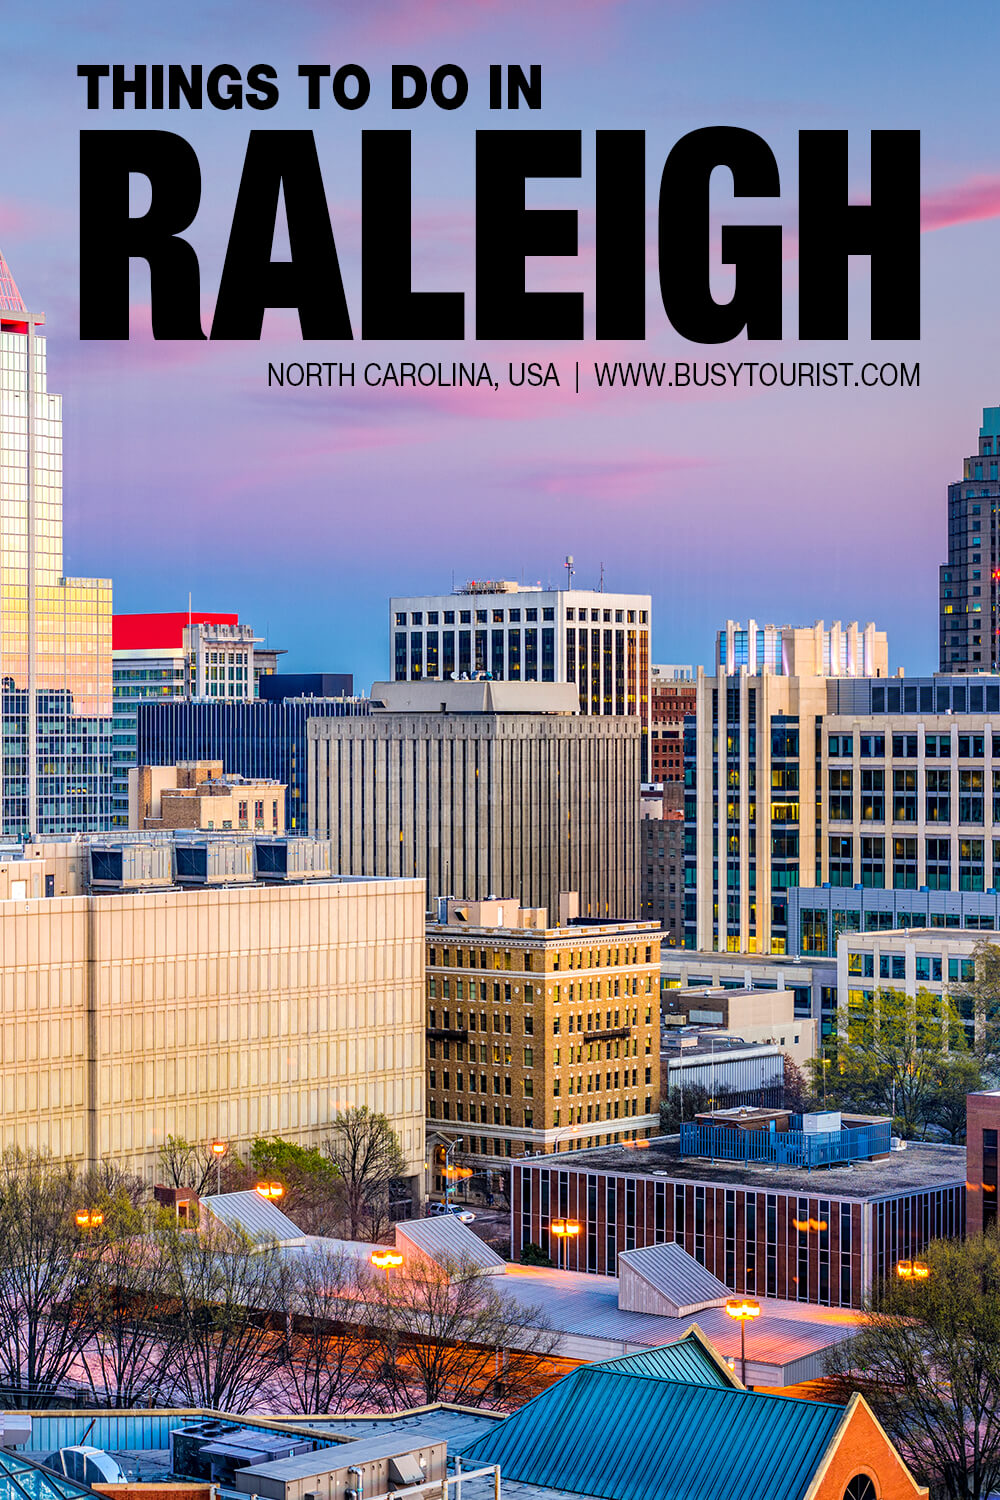 27 Best & Fun Things To Do In Raleigh (NC) - Attractions & Activities